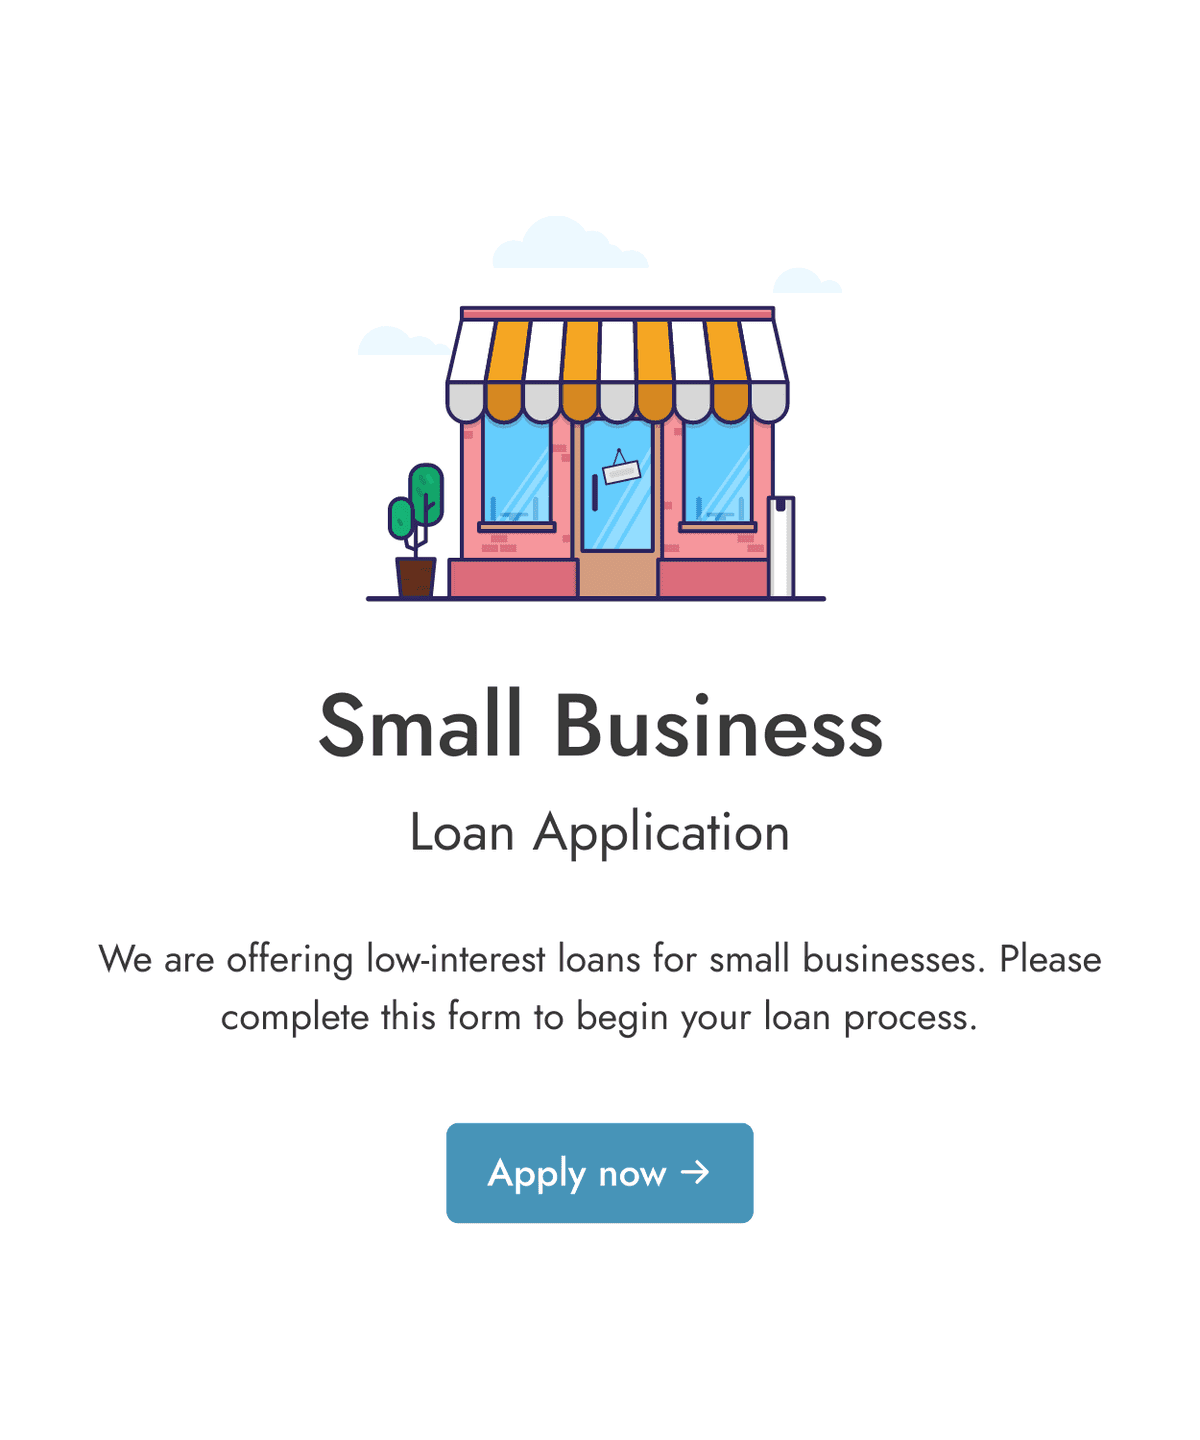 Welcome page of a loan application form with an illustration of a shop, welcome text, and an 'Apply now' button